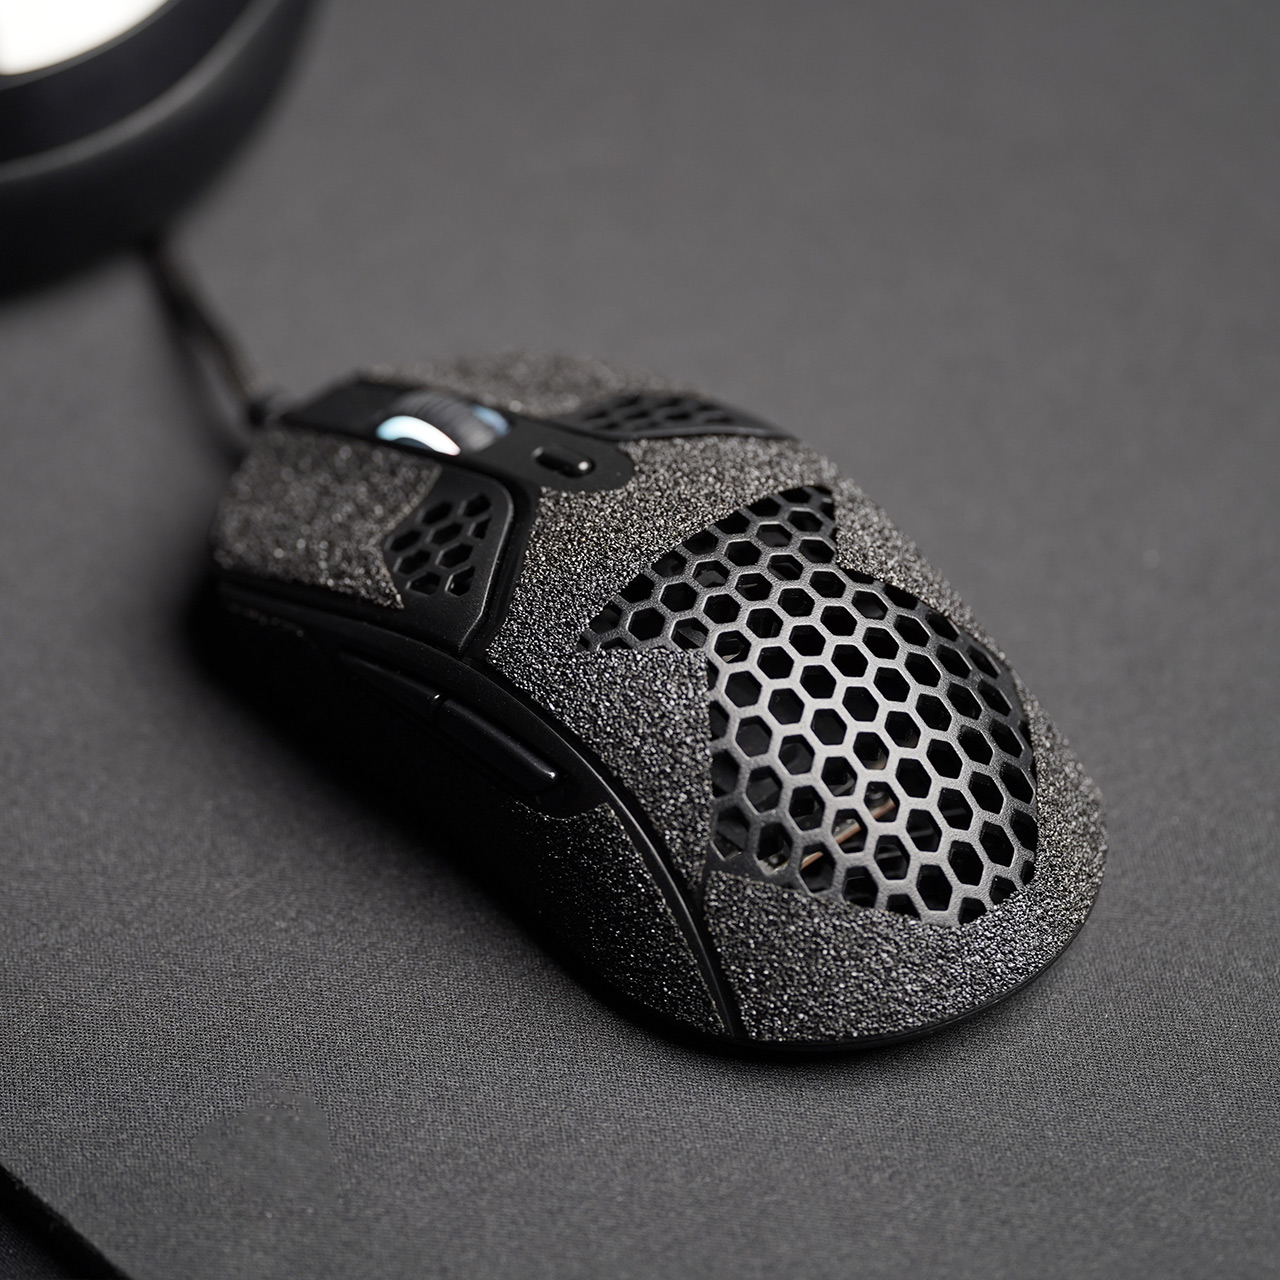 HyperX Pulsefire Haste Antgrip • Antgrip - Upgrade your gaming mouse.